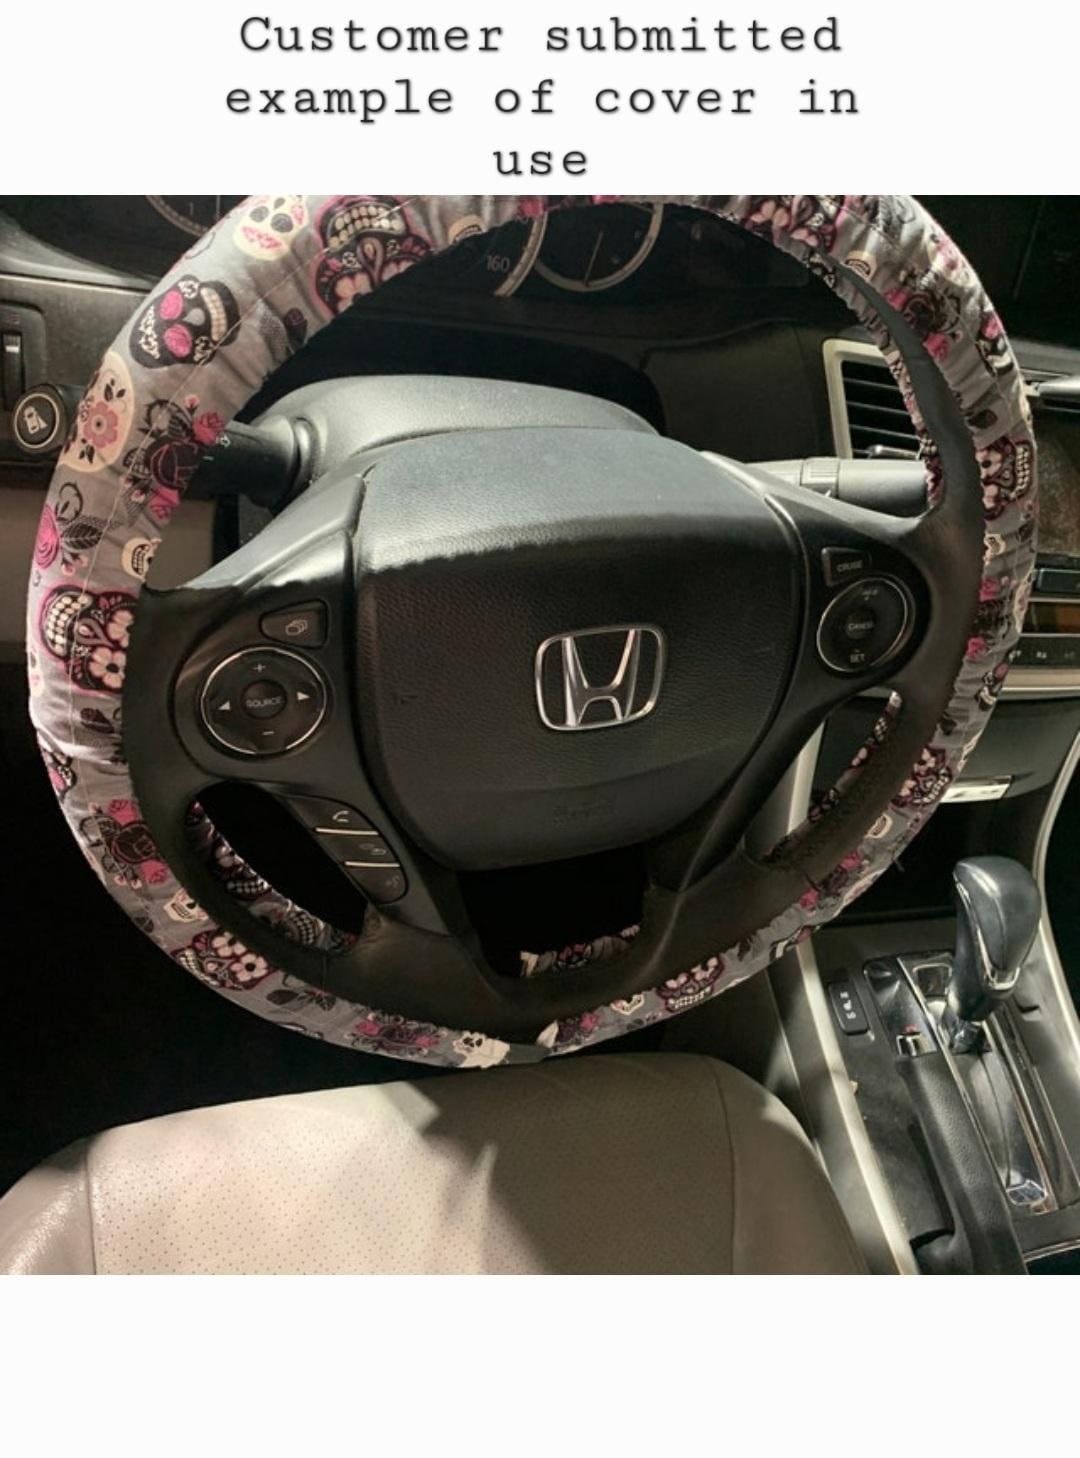 Floral Watercolor Steering Wheel Cover, Custom Car Accessories, 100% Cotton Washable - Harlow's Store and Garden Gifts